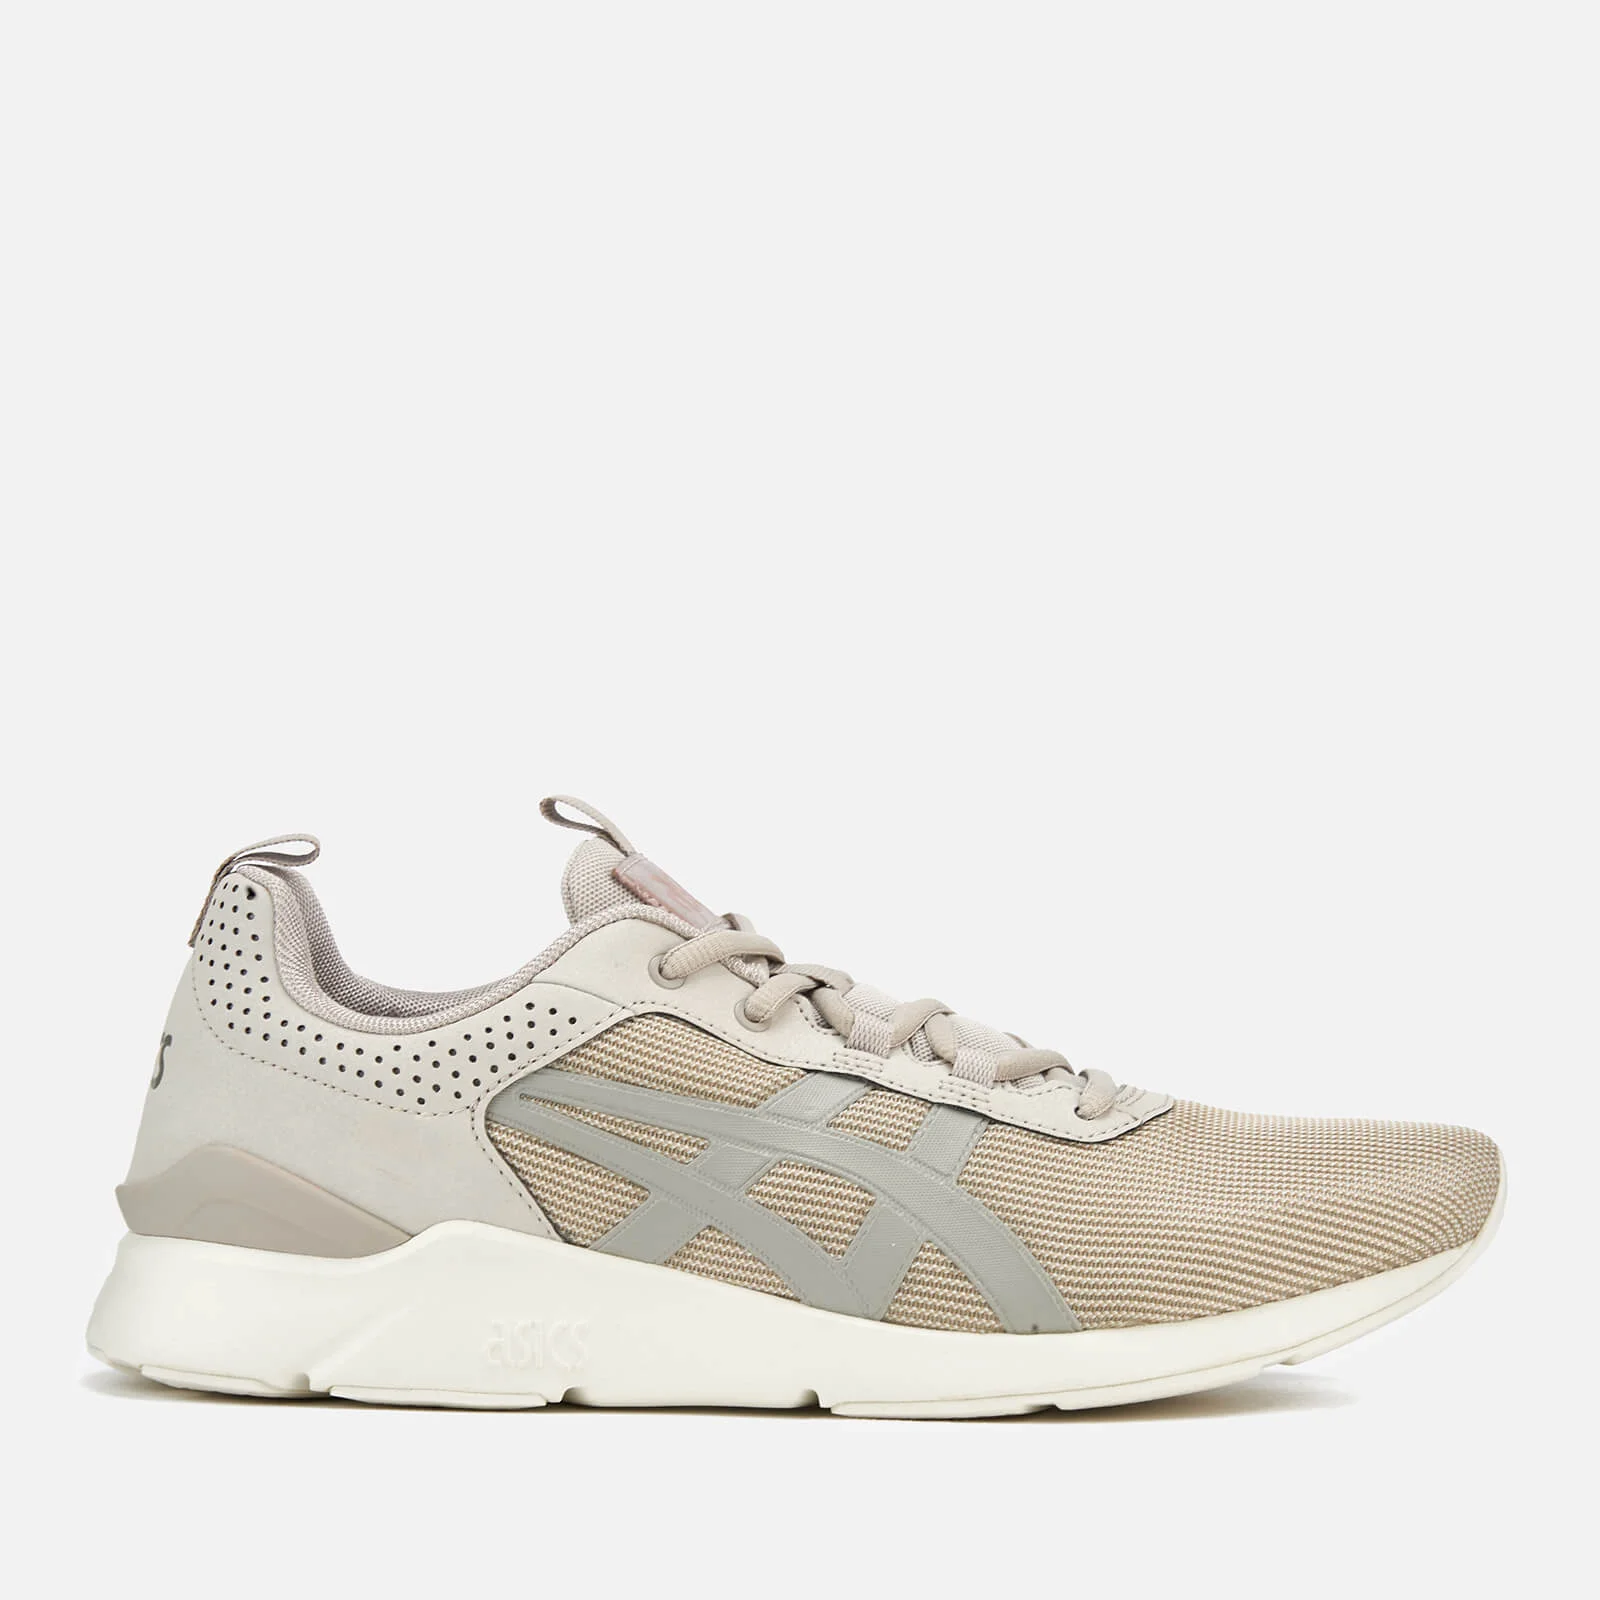 Asics Lifestyle Men's Gel-Lyte Runner Trainers - Feather Grey/Feather Grey Image 1